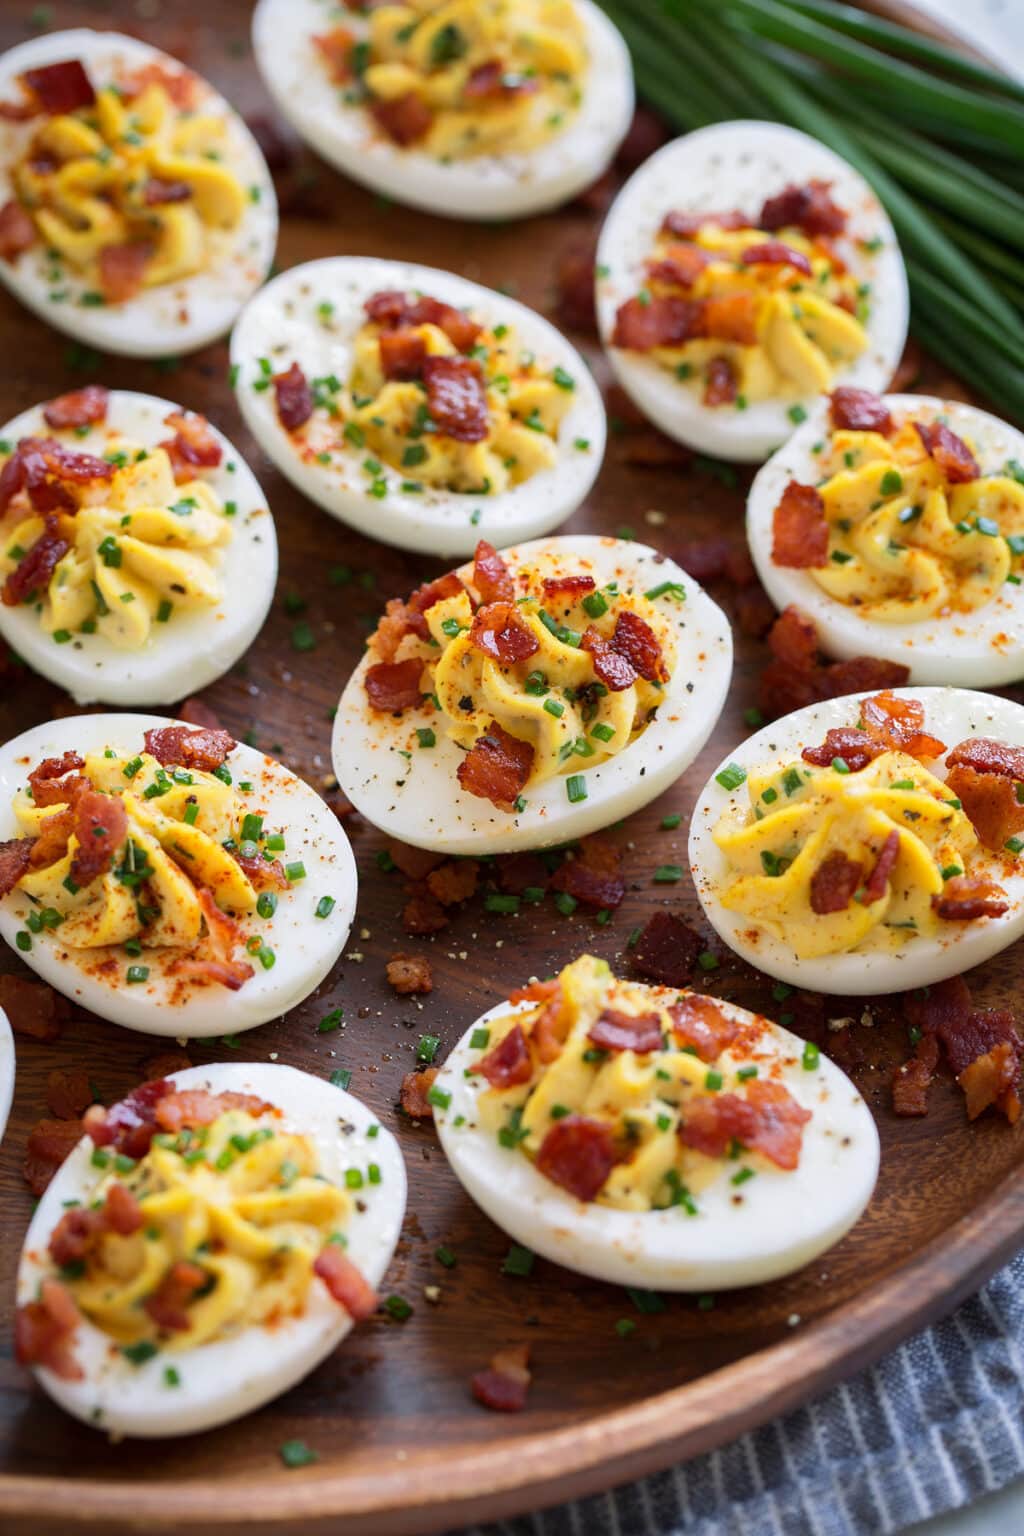 Deviled eggs on a wooden plate, topped with bacon bits and chopped up chives and sprinkled with paprika.